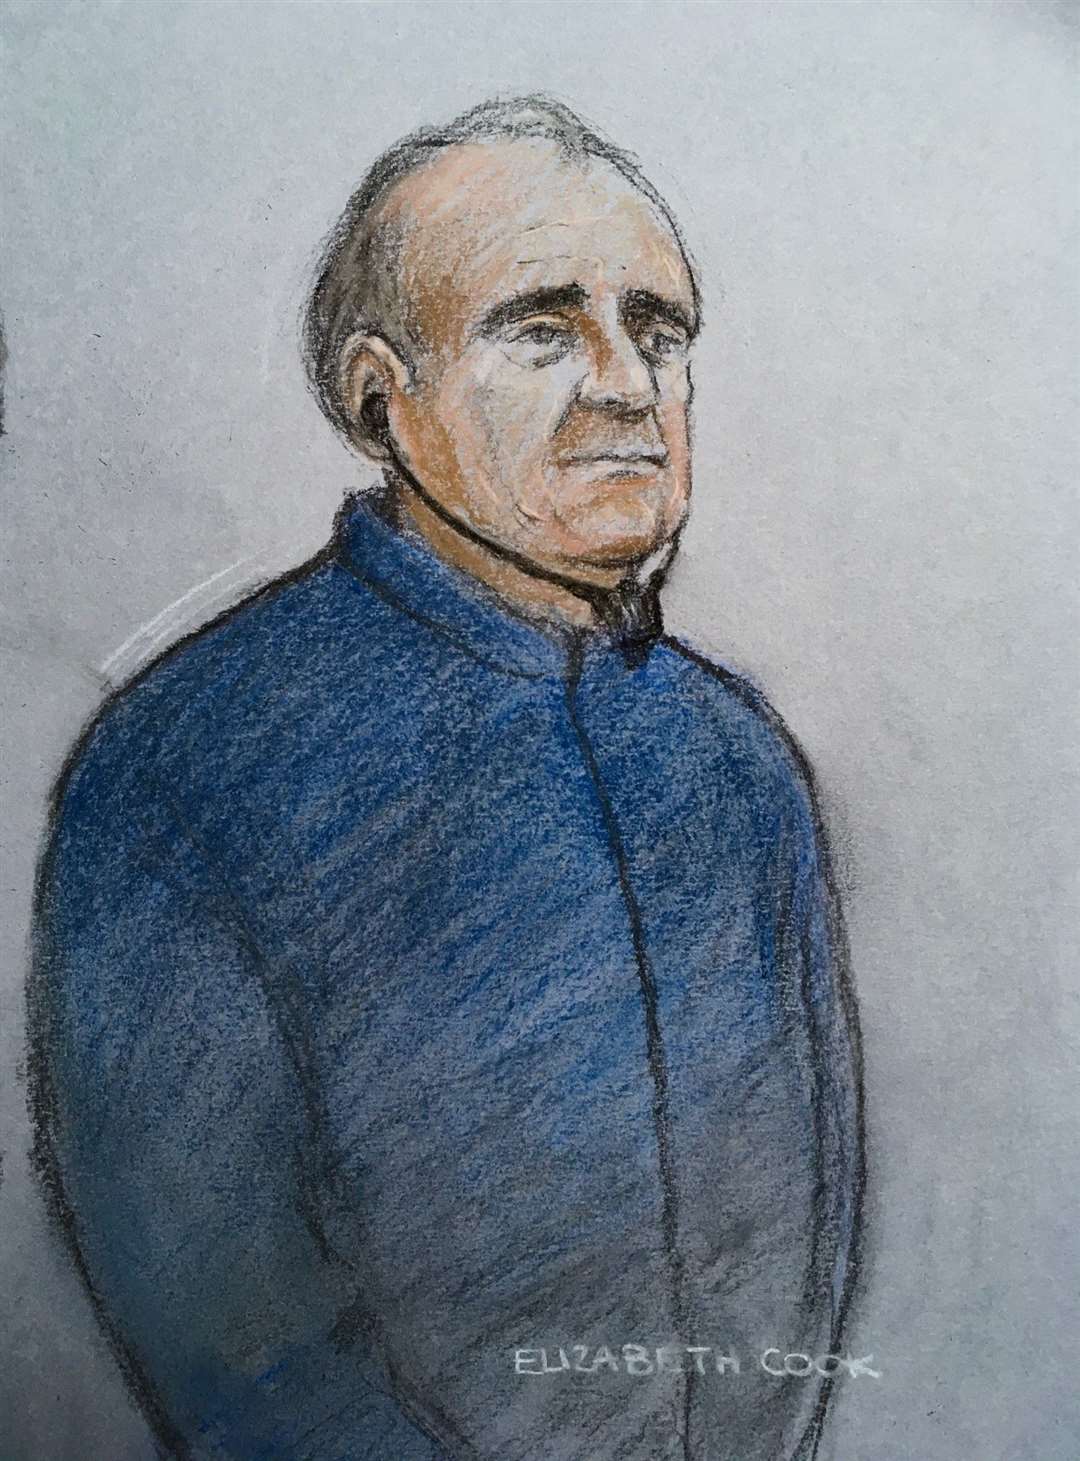 Court artist sketch of David Smith wearing headphones during an earlier hearing at Westminster Magistrates’ Court (Elizabeth Cook/PA)